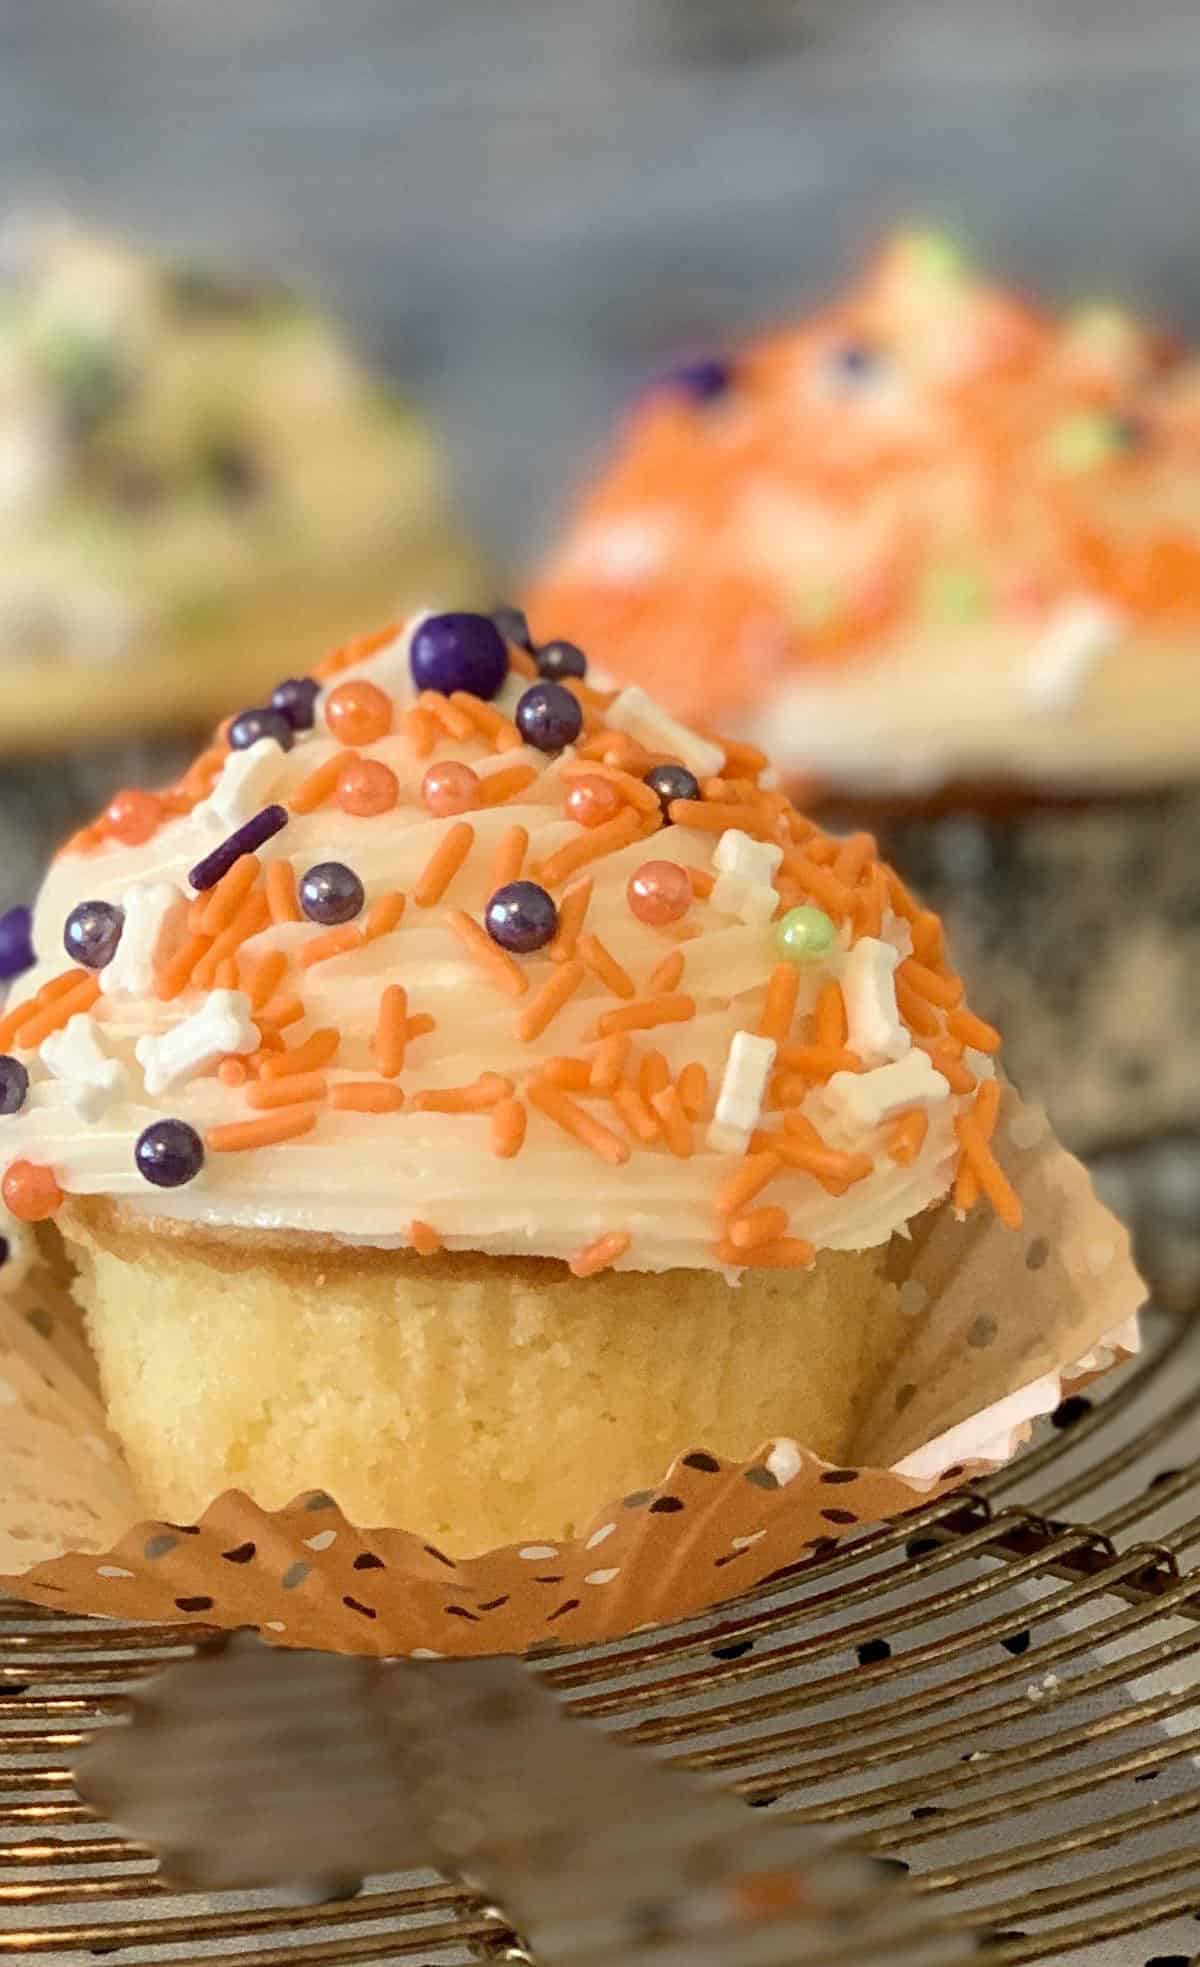  These orange vanilla cupcakes are like a ray of sunshine on a cloudy day.